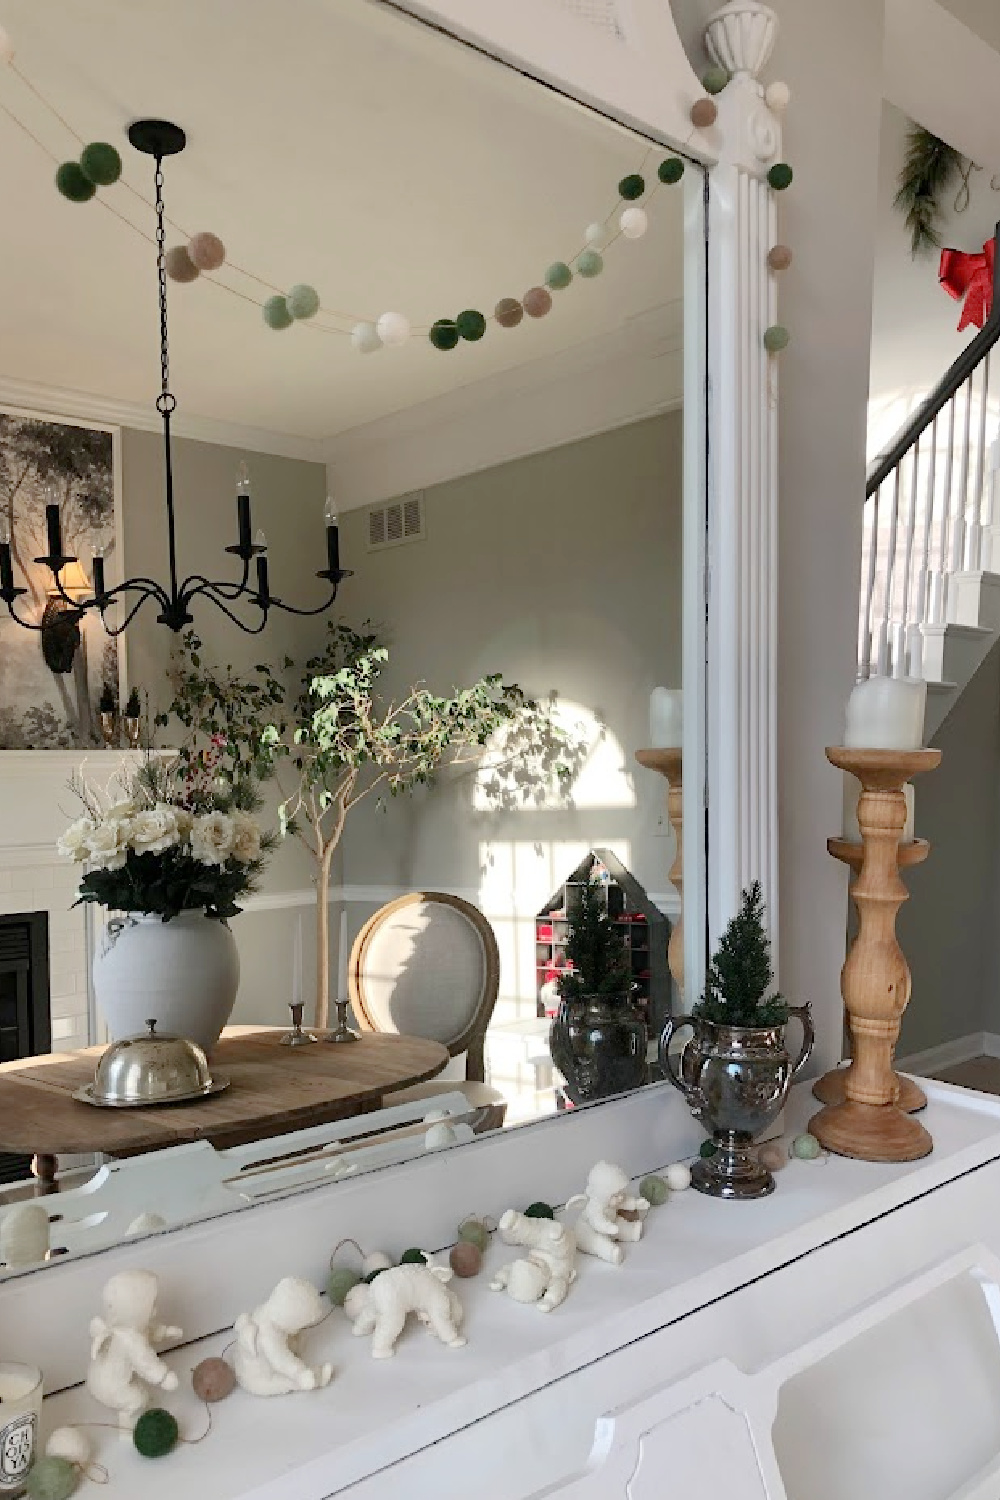 Our dining room with fireplace is used as a music room where a white piano and antique mirror are decorated for Christmas in white - Hello Lovely Studio. #whitechristmas #whitepiano